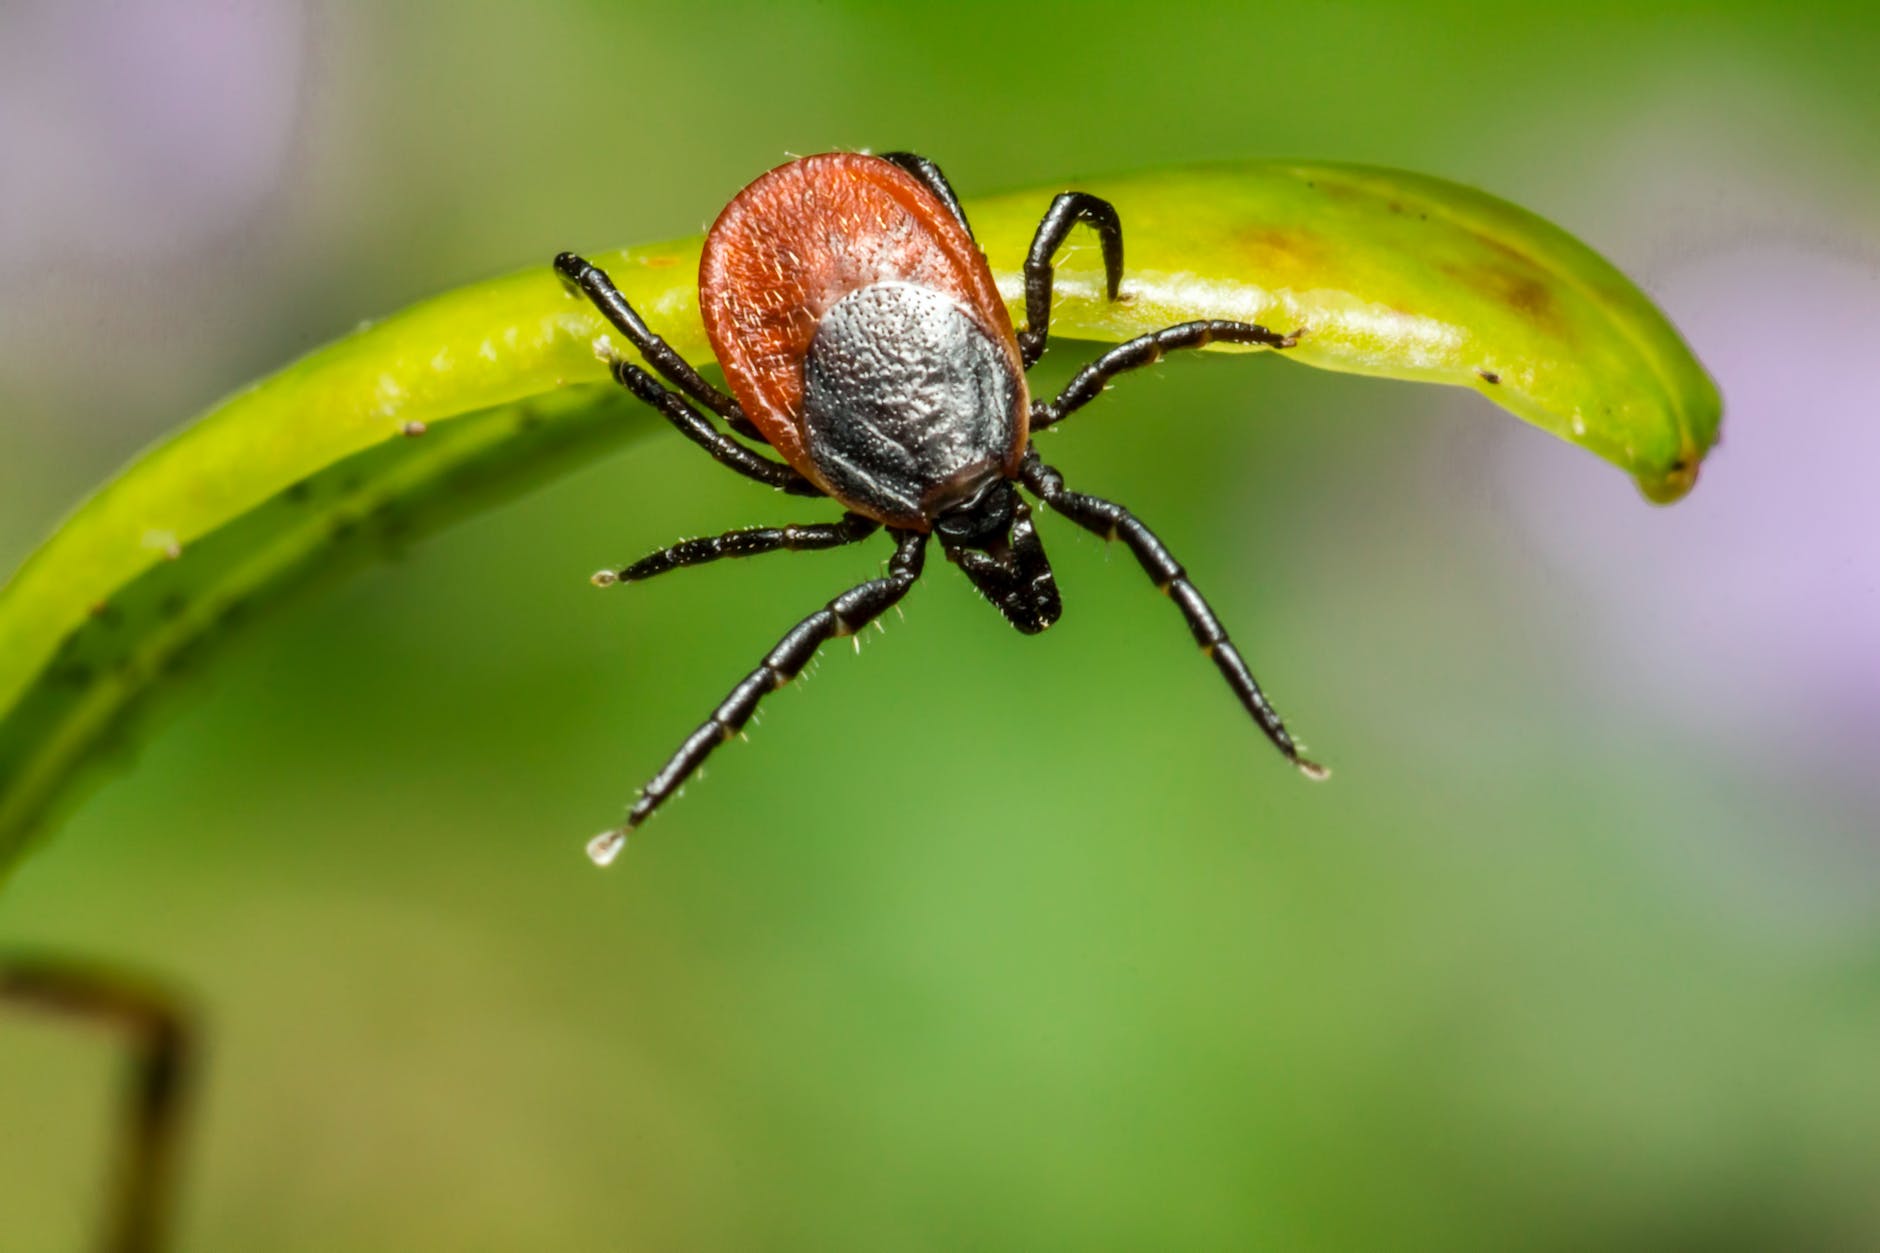 Ticks can’t jump, but static electricity can throw them onto hosts